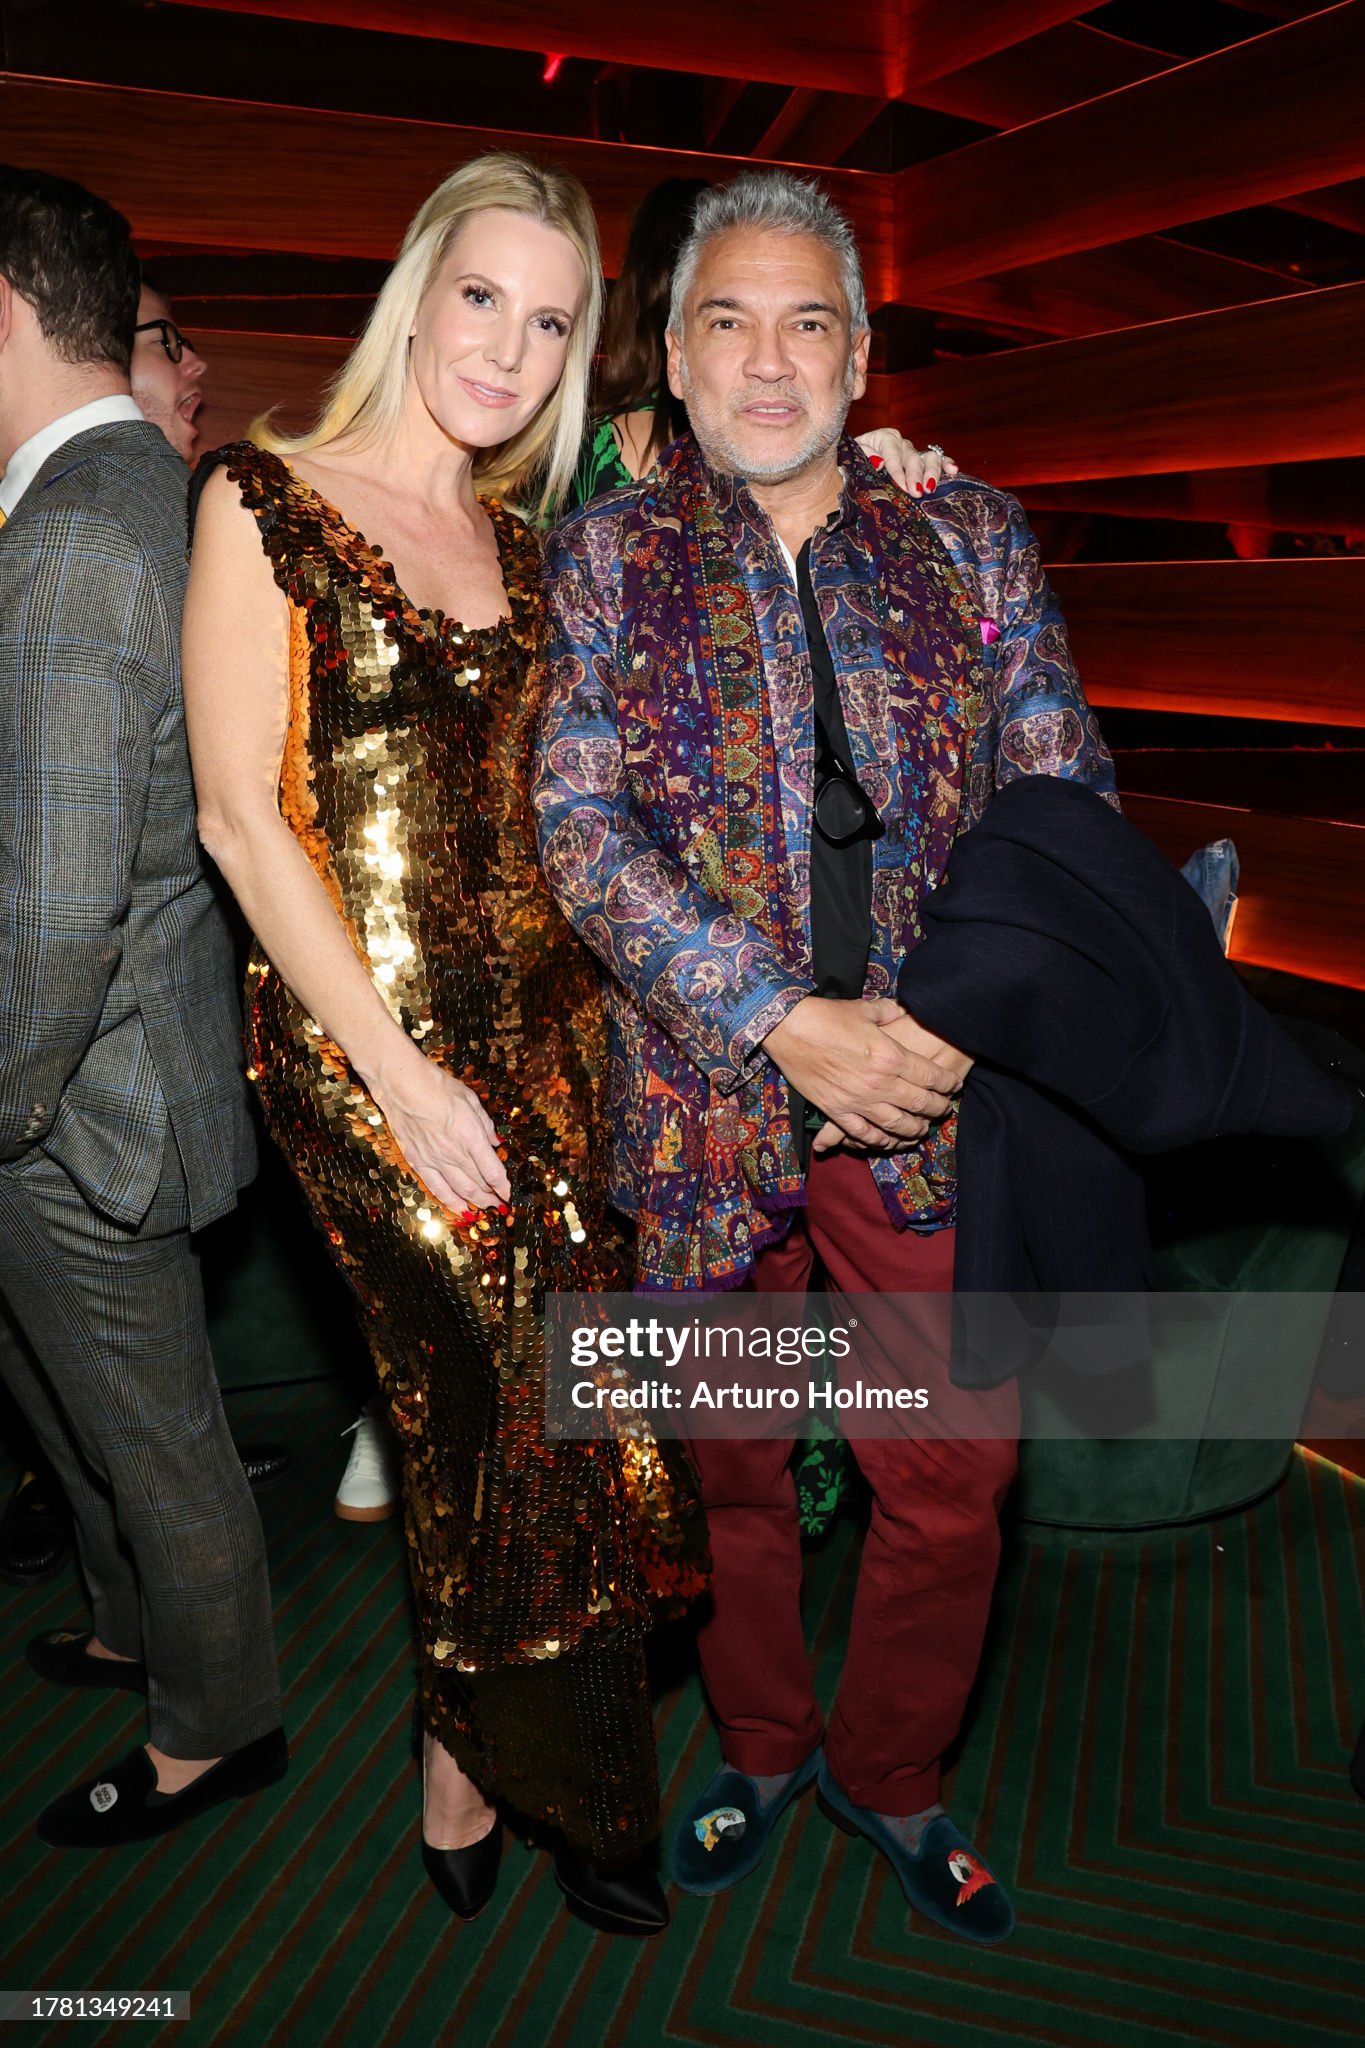 https://media.gettyimages.com/id/1781349241/photo/nina-garcia-alice-naylor-leyland-celebrate-tablescape-and-holiday-collection.jpg?s=2048x2048&w=gi&k=20&c=HUmY1XHypbG8a353hSIWUpxqvzEWa9r_HoApQ9Uv-Lc=